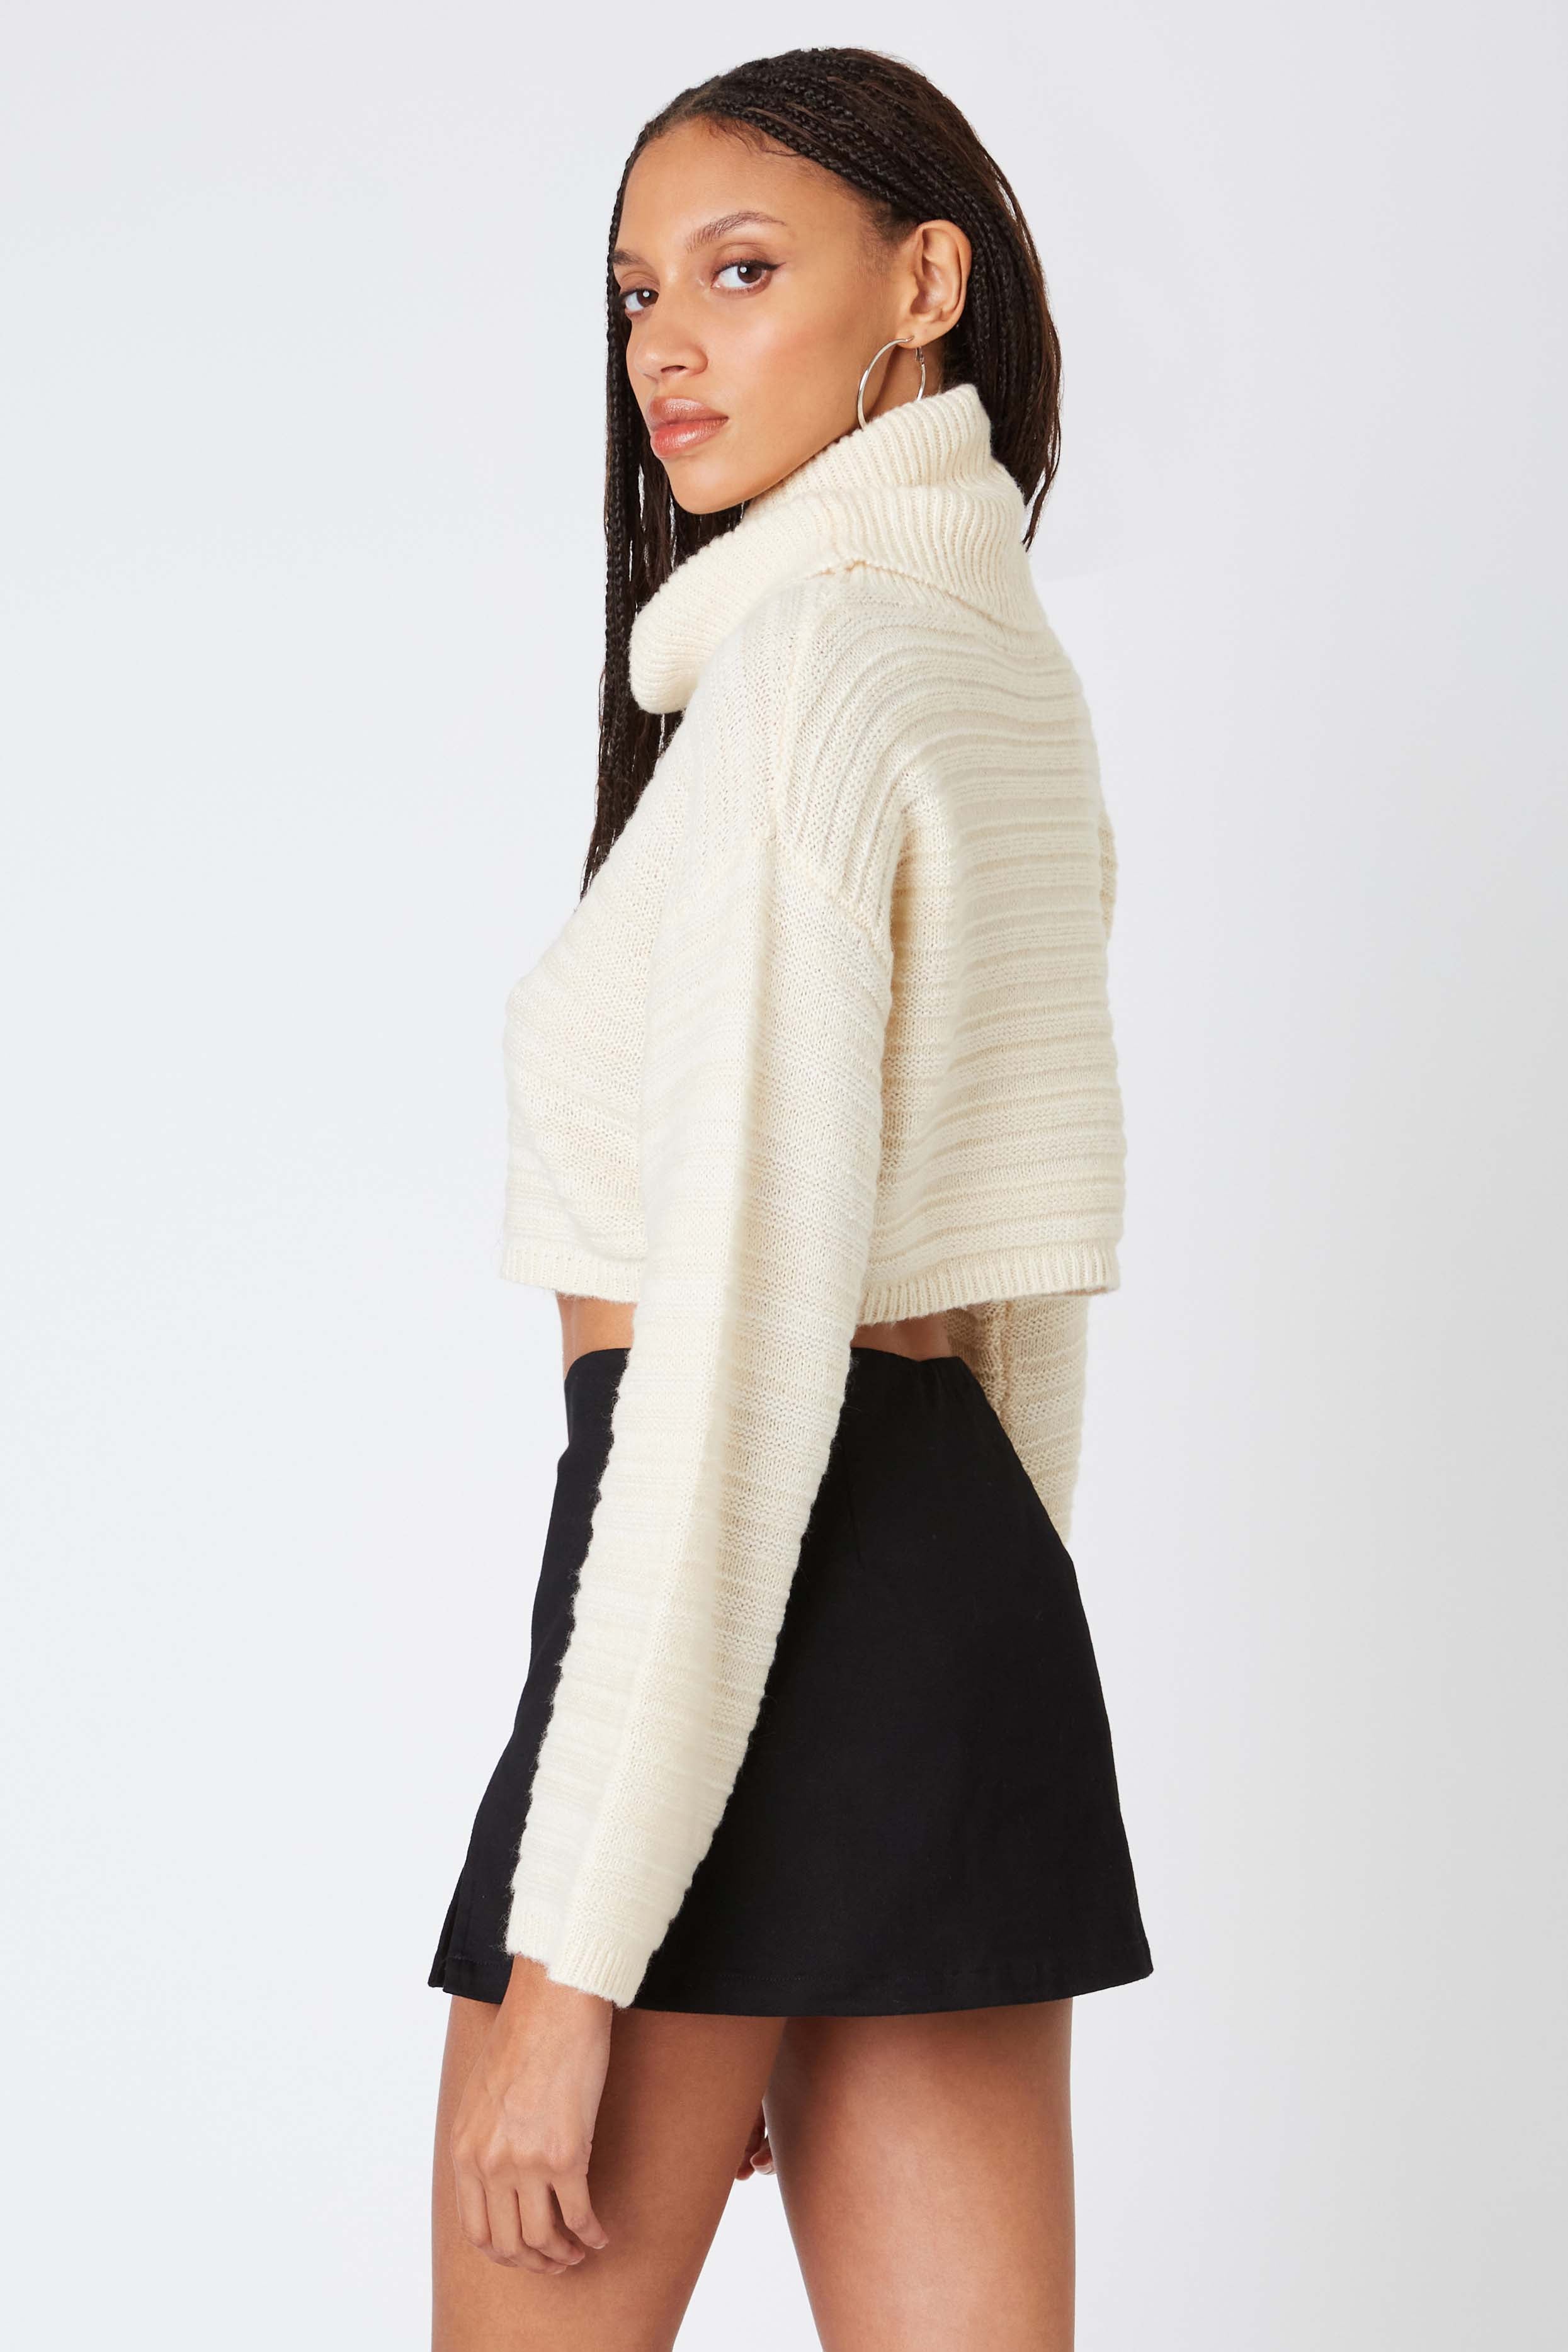 Cropped Turtleneck Sweater in Cream Back View